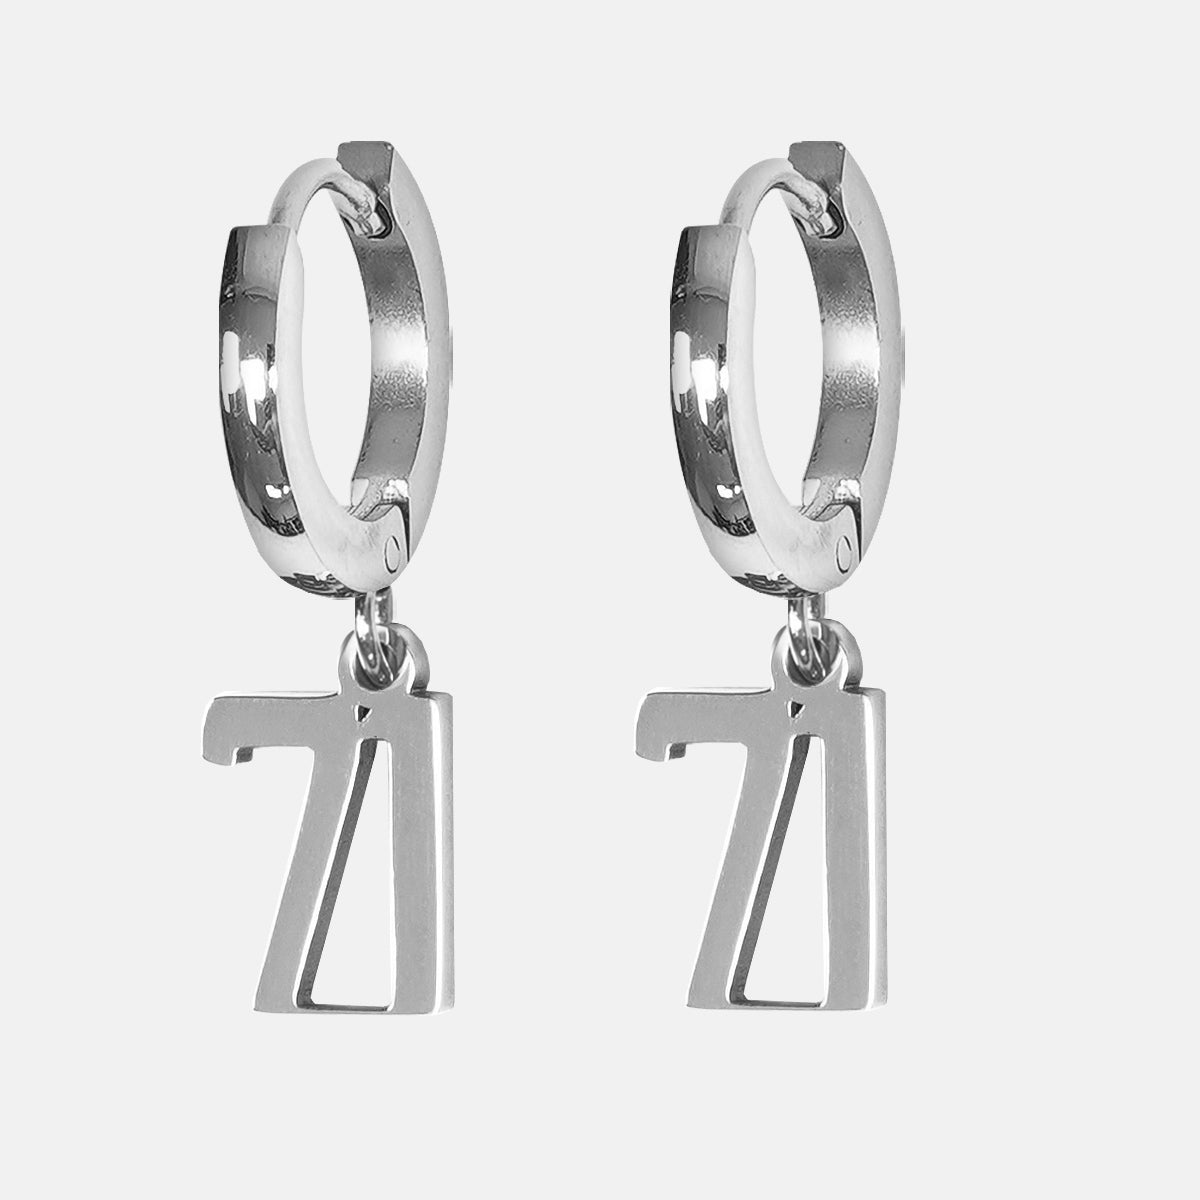 71 Number Earring - Stainless Steel